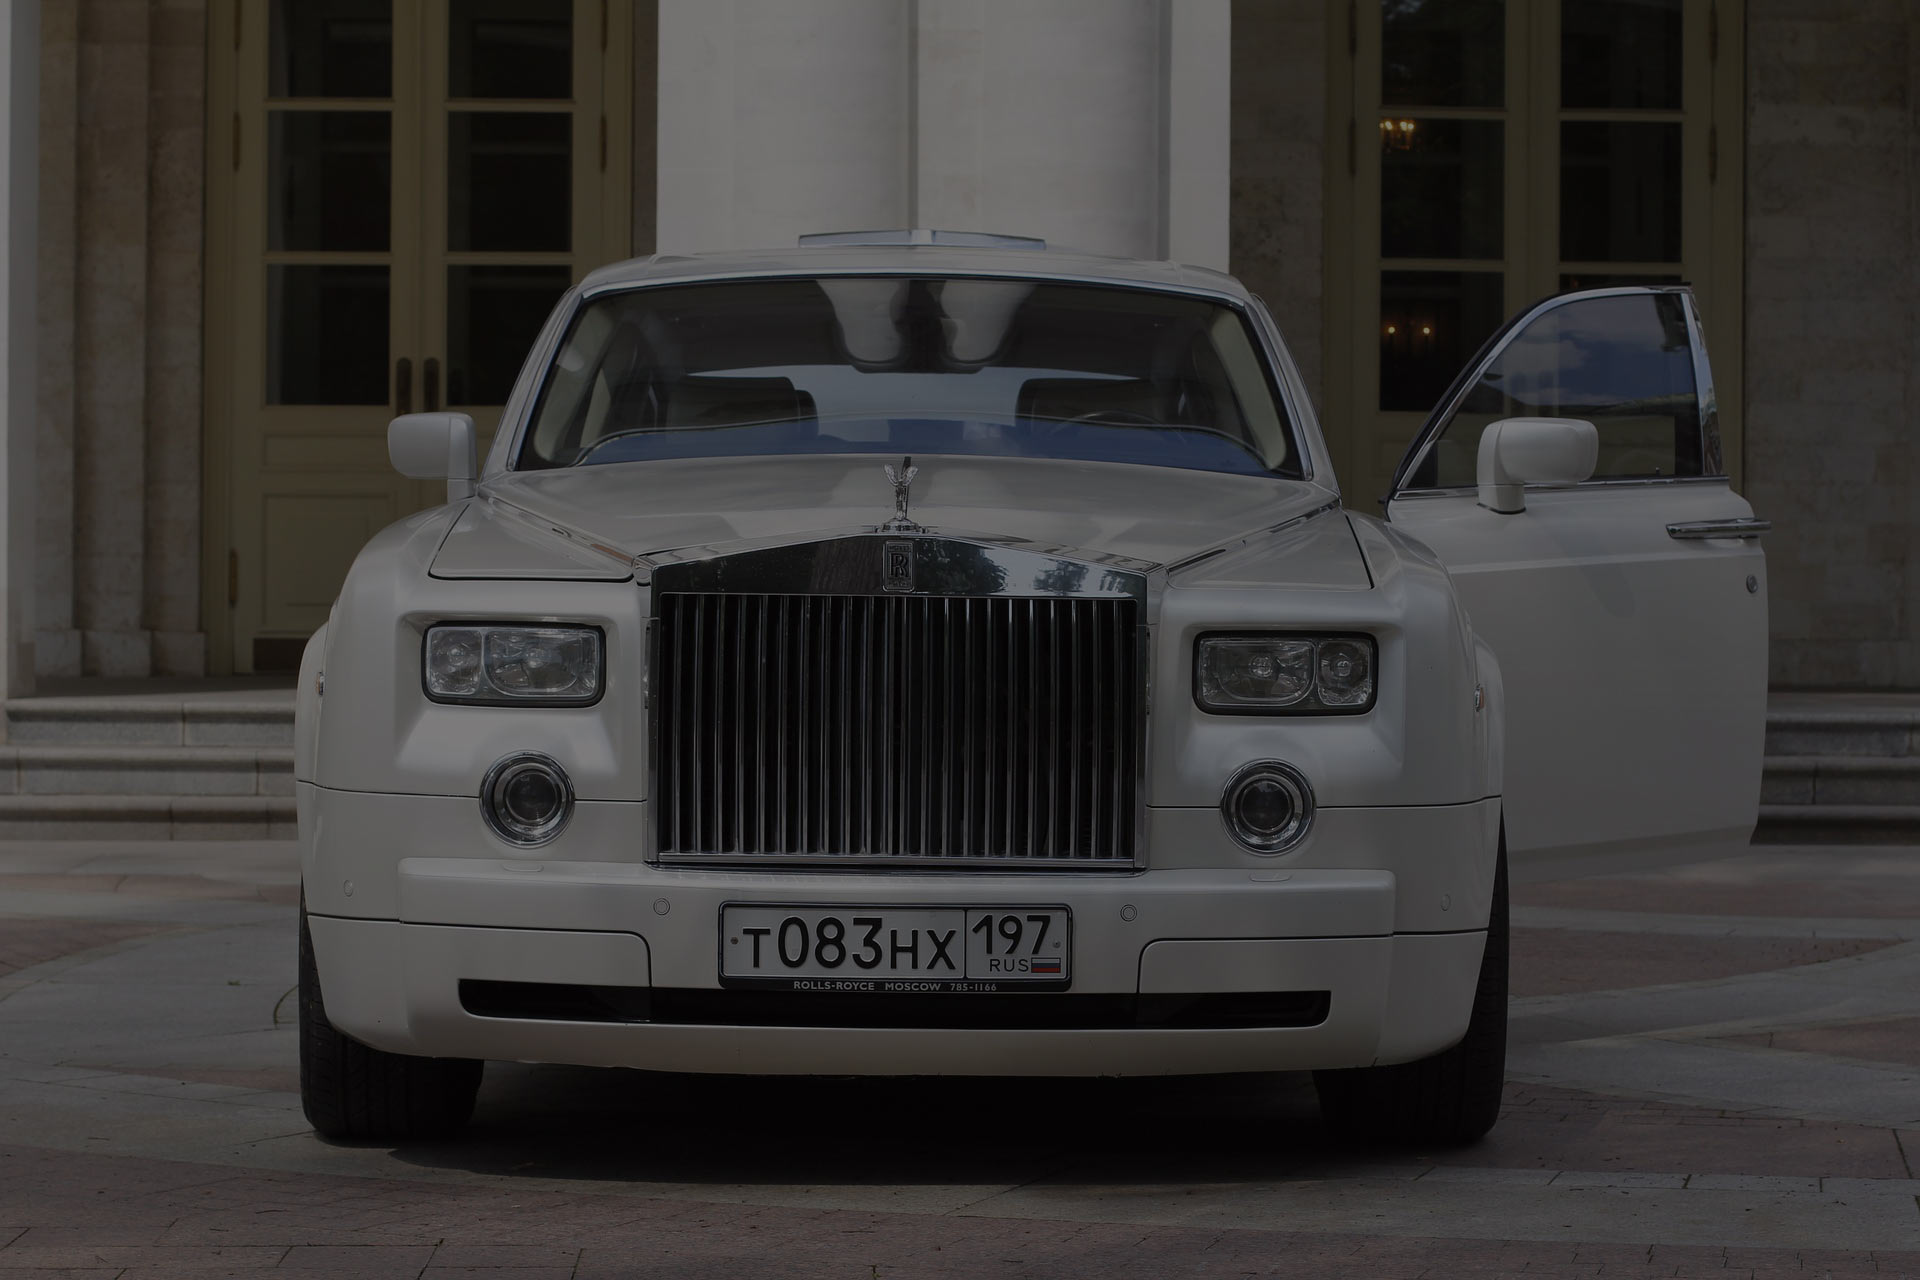 White luxury Rolls Royce that can be used for transportation service, for personal or business travel